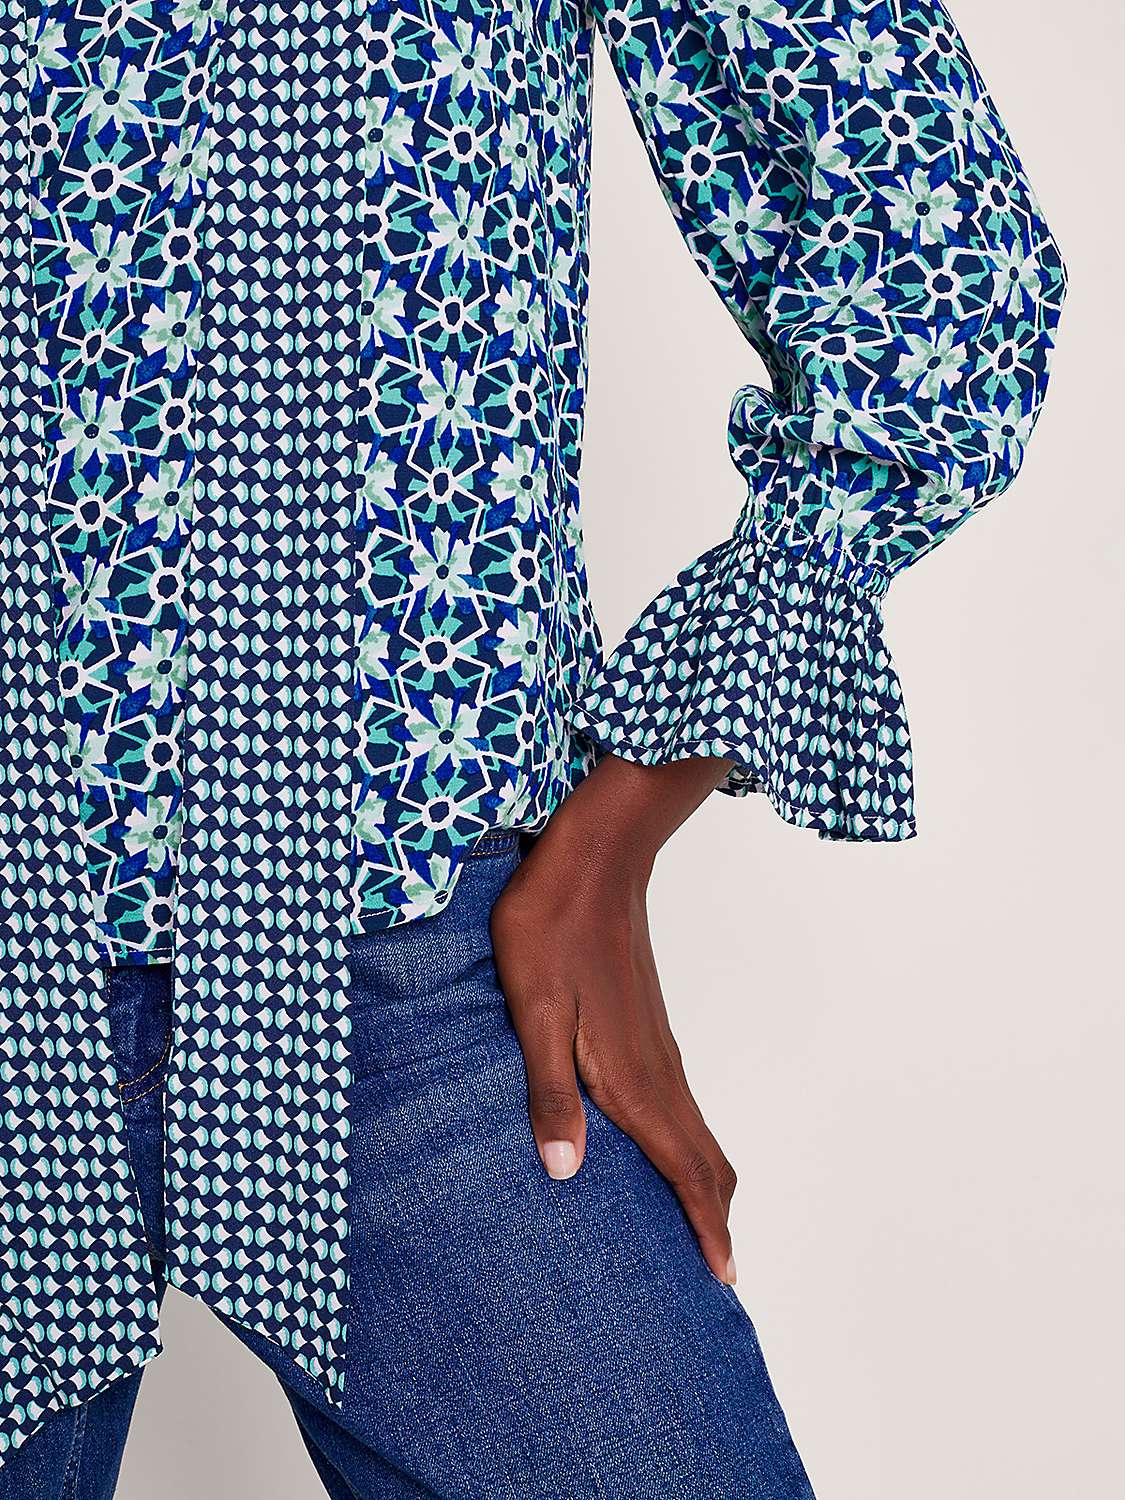 Buy Monsoon Clover Graphic Floral Print Pussybow Blouse, Navy/Multi Online at johnlewis.com